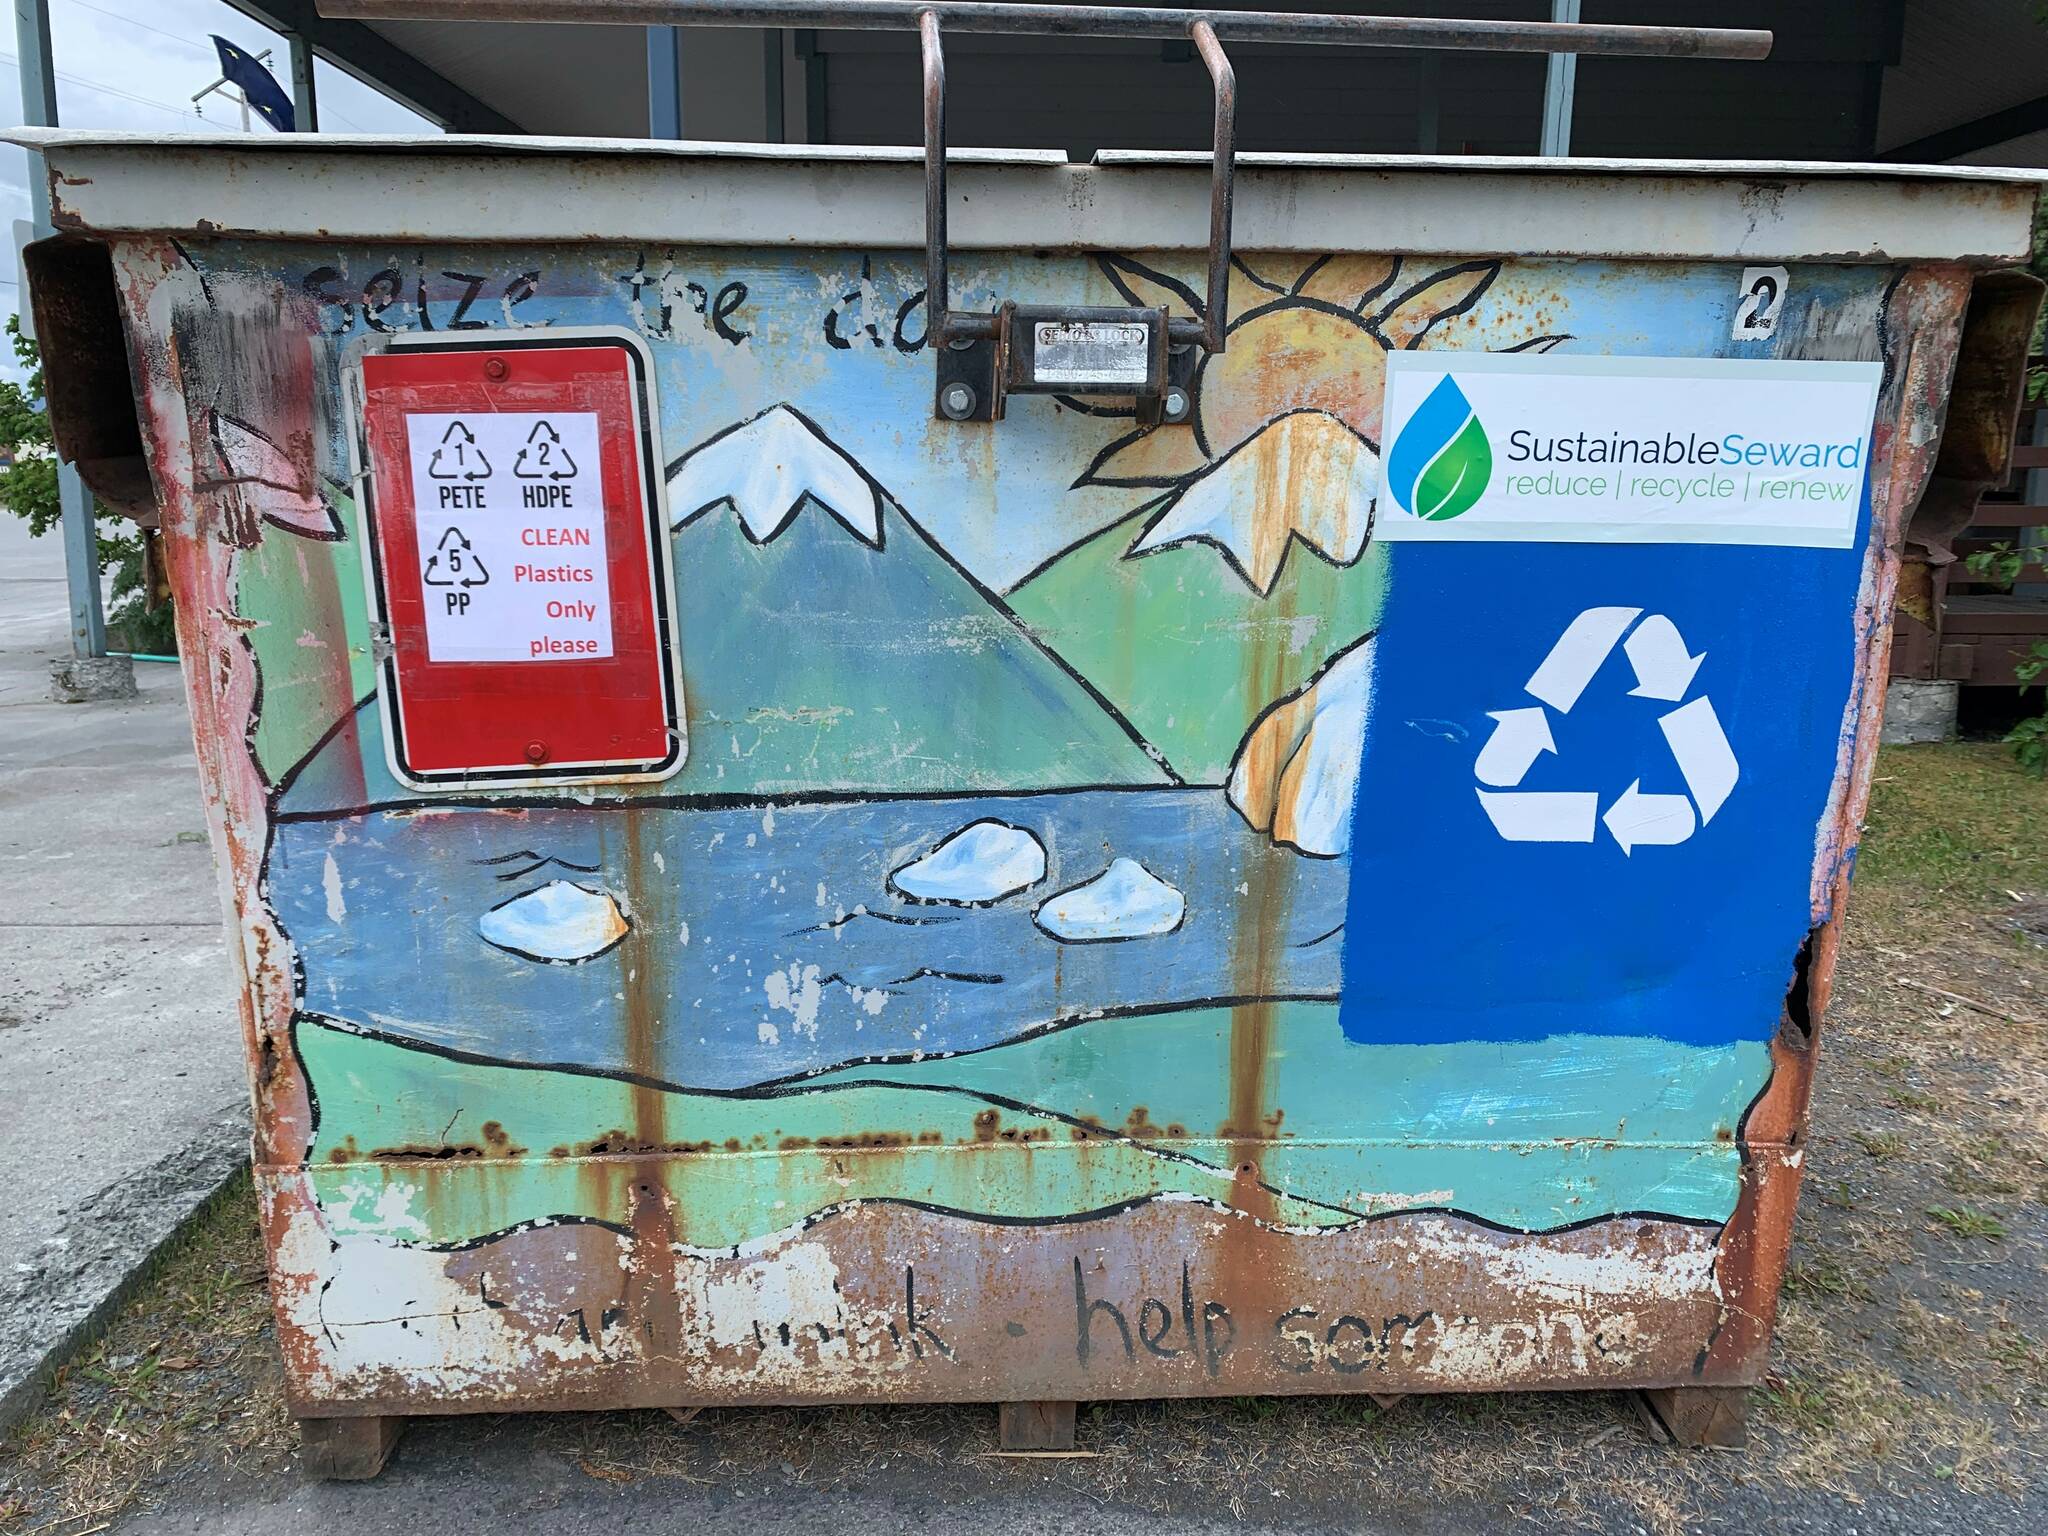 Recycling signage is displayed on an upscaled dumpster used to collect plastics as part of a project to turn discarded plastic waste into artificial lumber, in Seward, Alaska. (Photo courtesy Lori Landstrom)